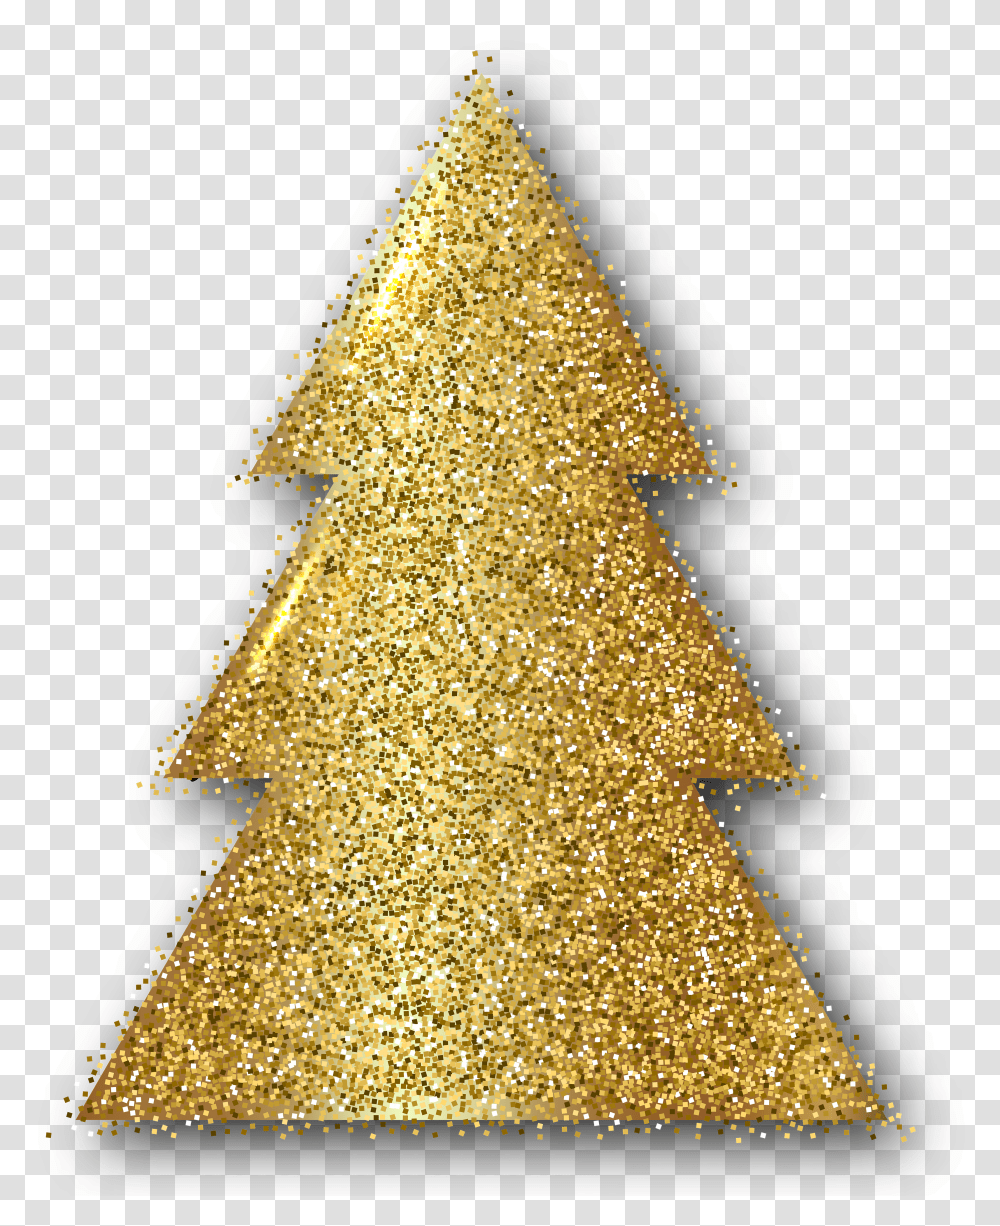 Christmas Tree Clipart Gold Gold Clip Art Christmas Decorations Transparent Png